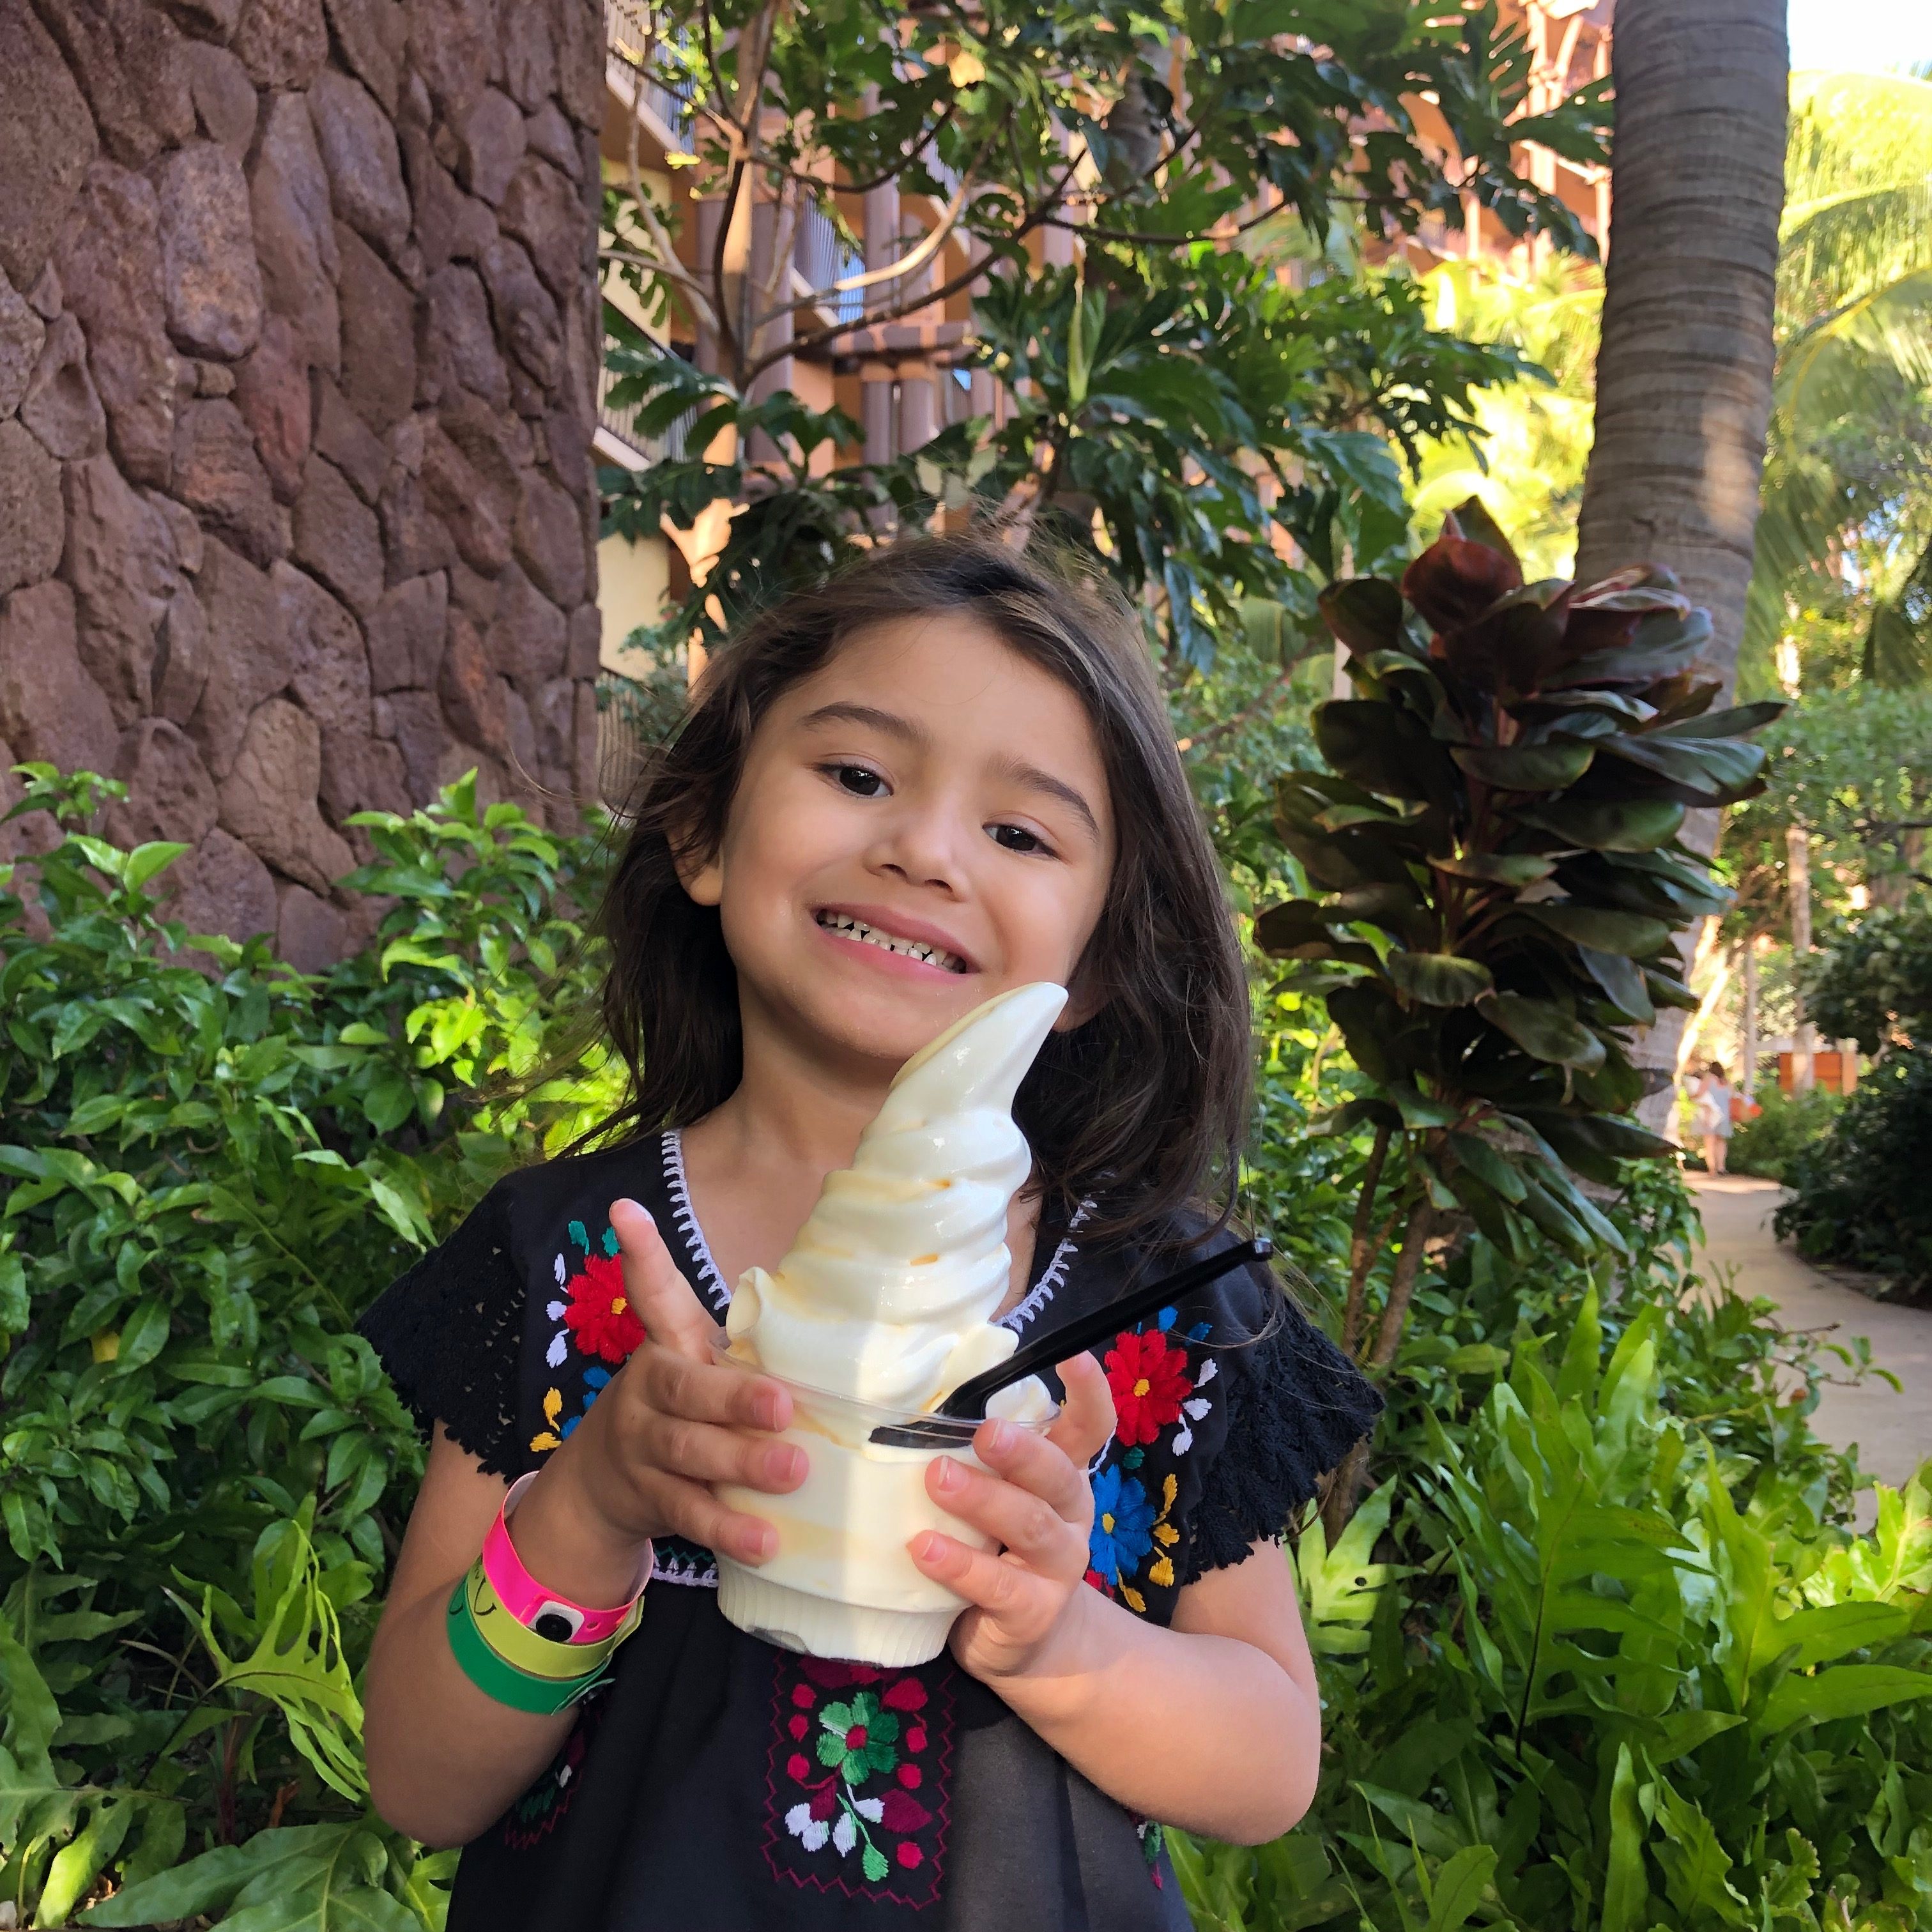 Mickey-Snowcone-Disney's Aulani Most Instagram-Worthy Spots-more affordable than you think-deals-family travel-Hawaii